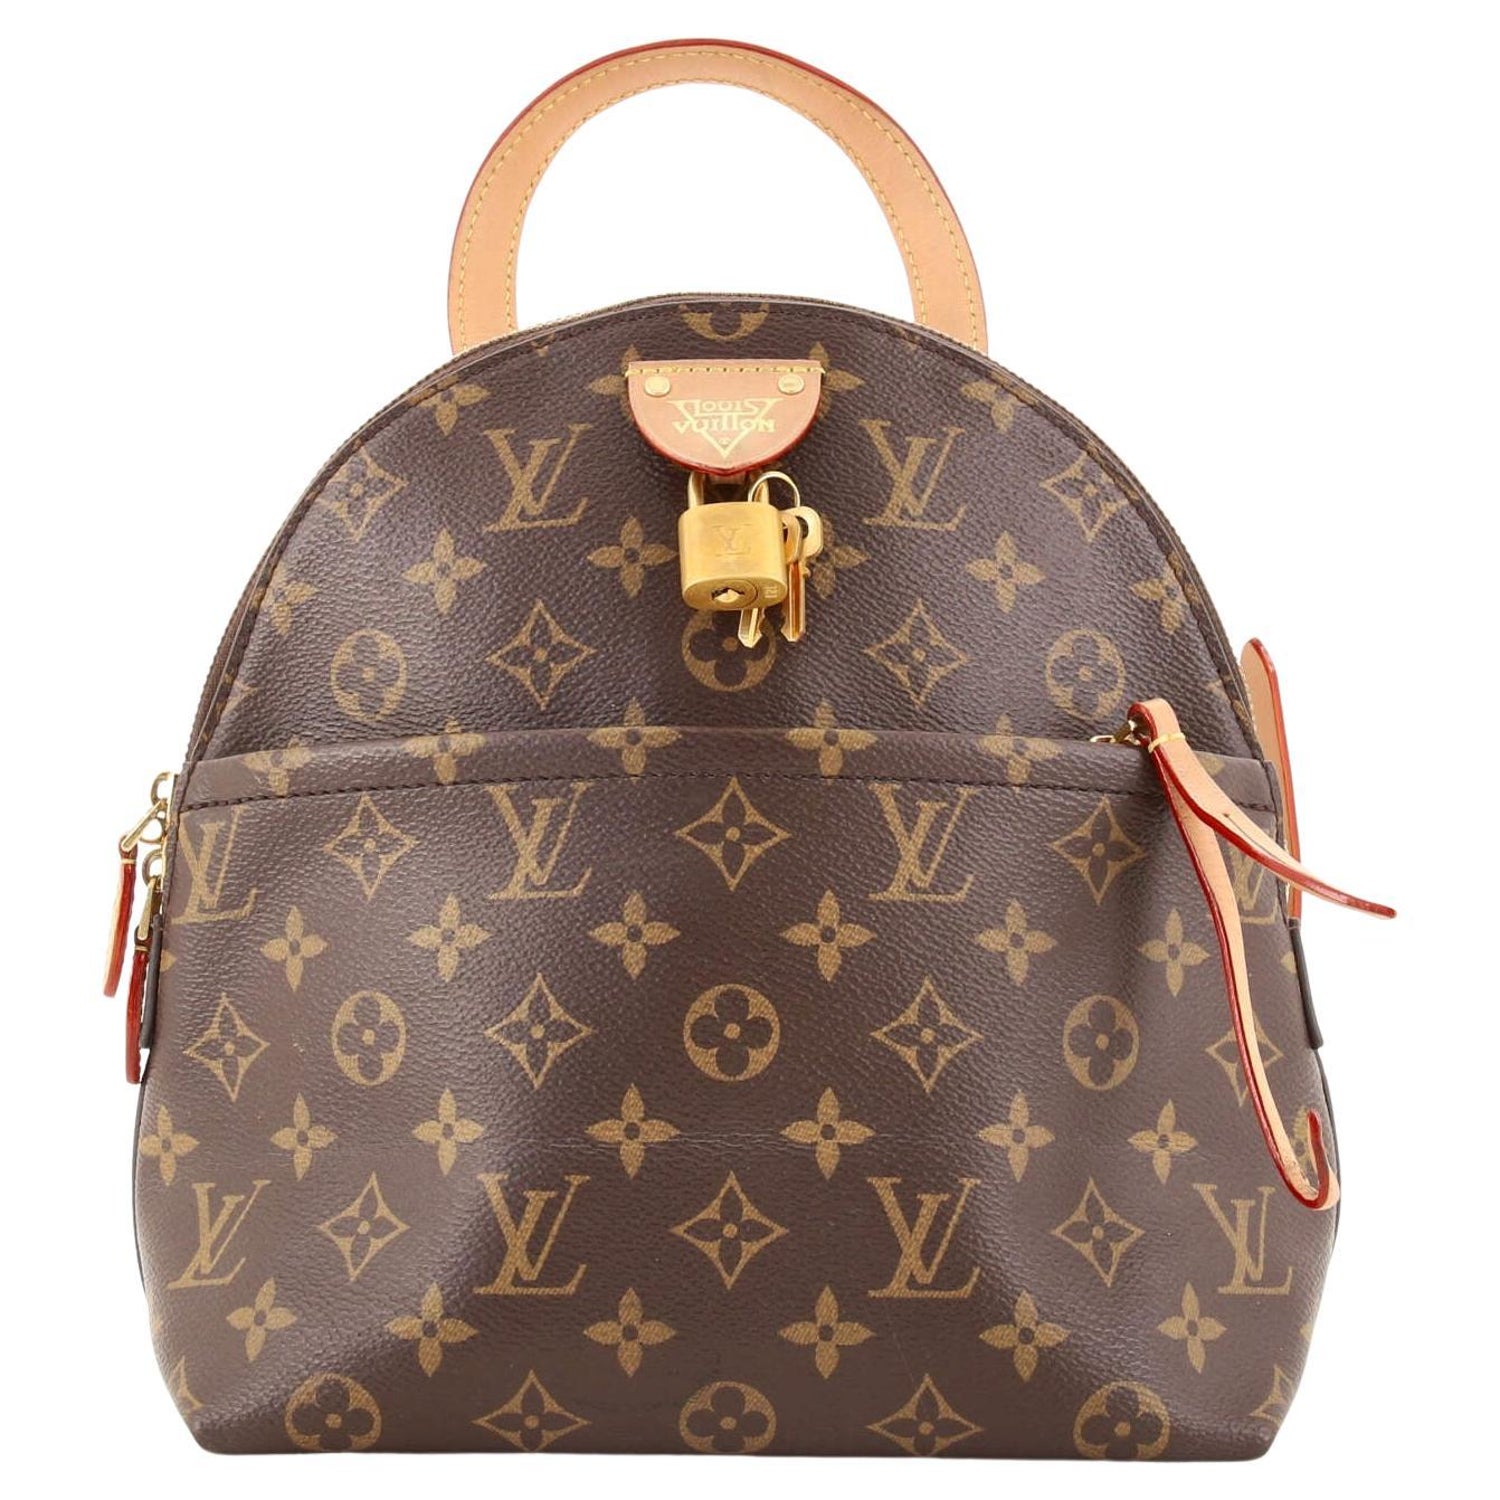 How to remove hotstamp from Louis Vuitton vachetta 